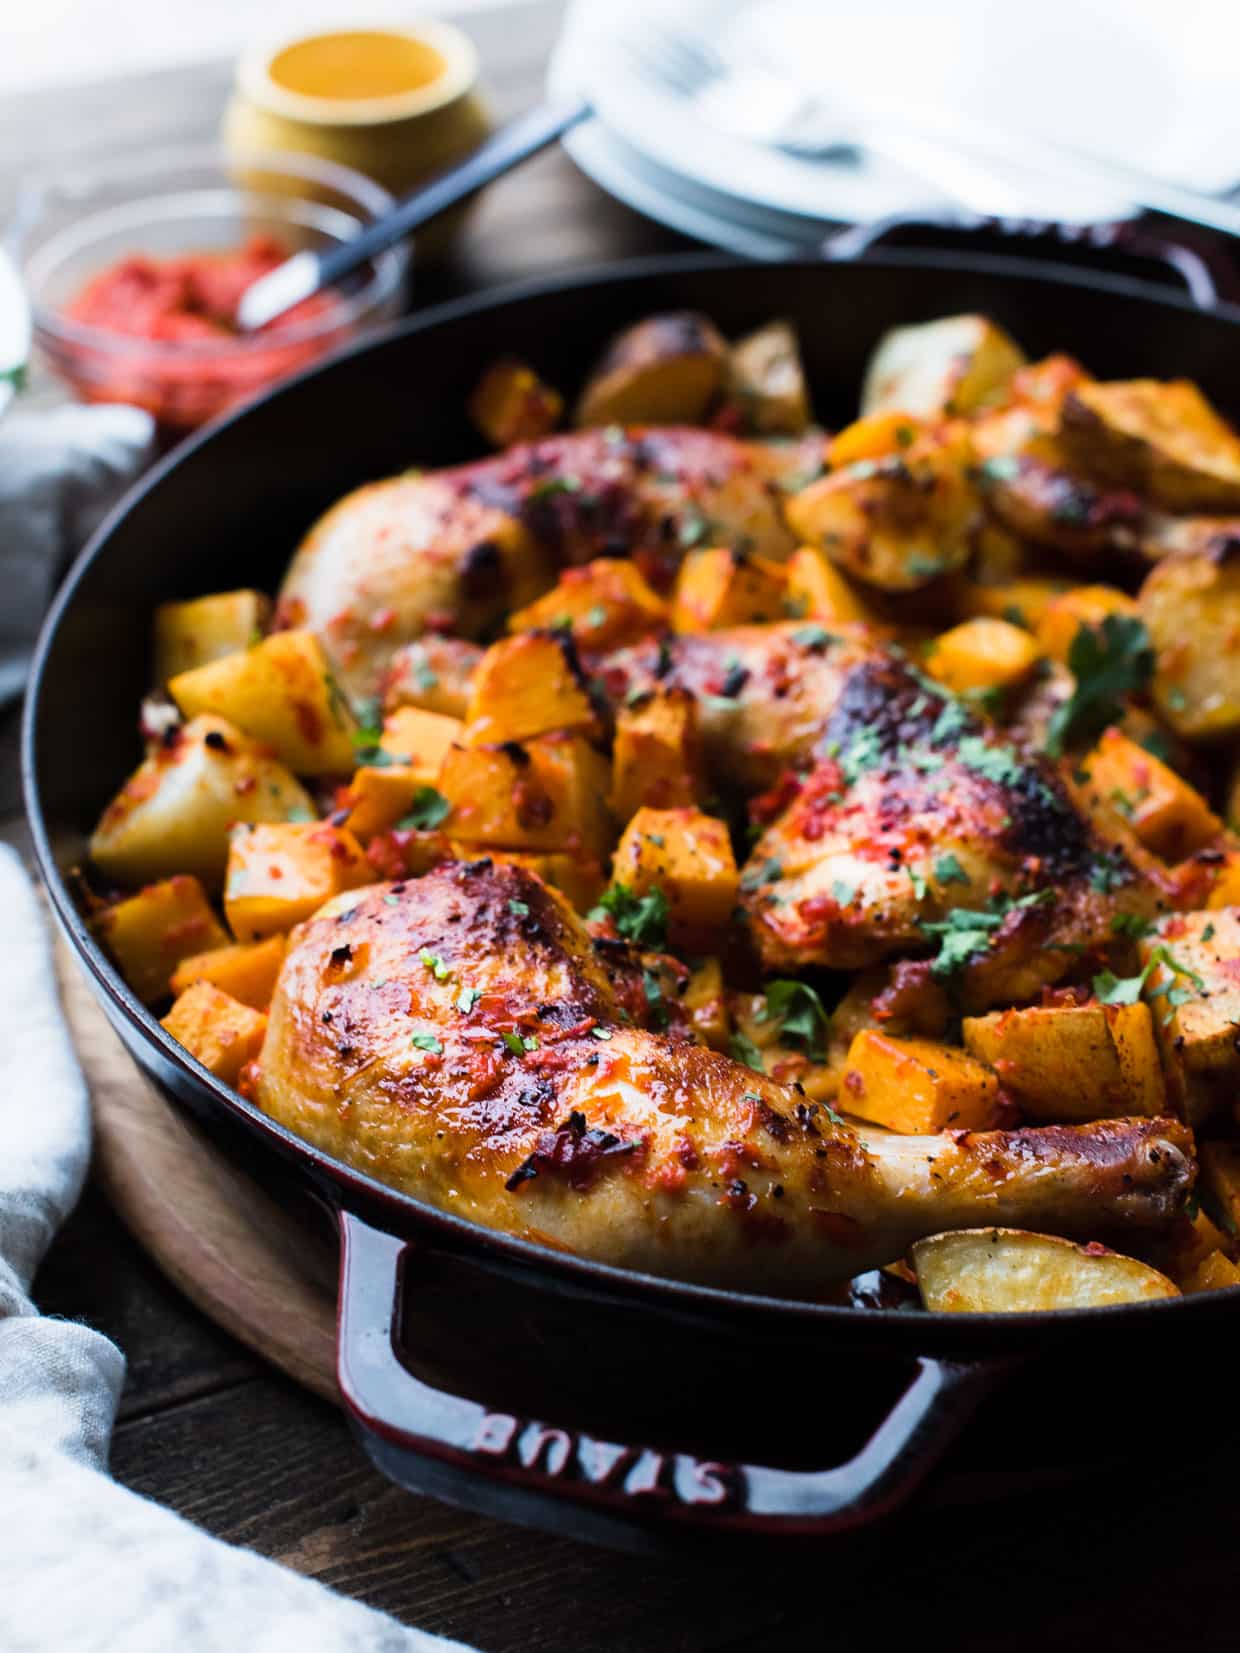 Close up view of Harissa-style Roast Chicken with Butternut Squash and Potatoes served in a Dutch oven.